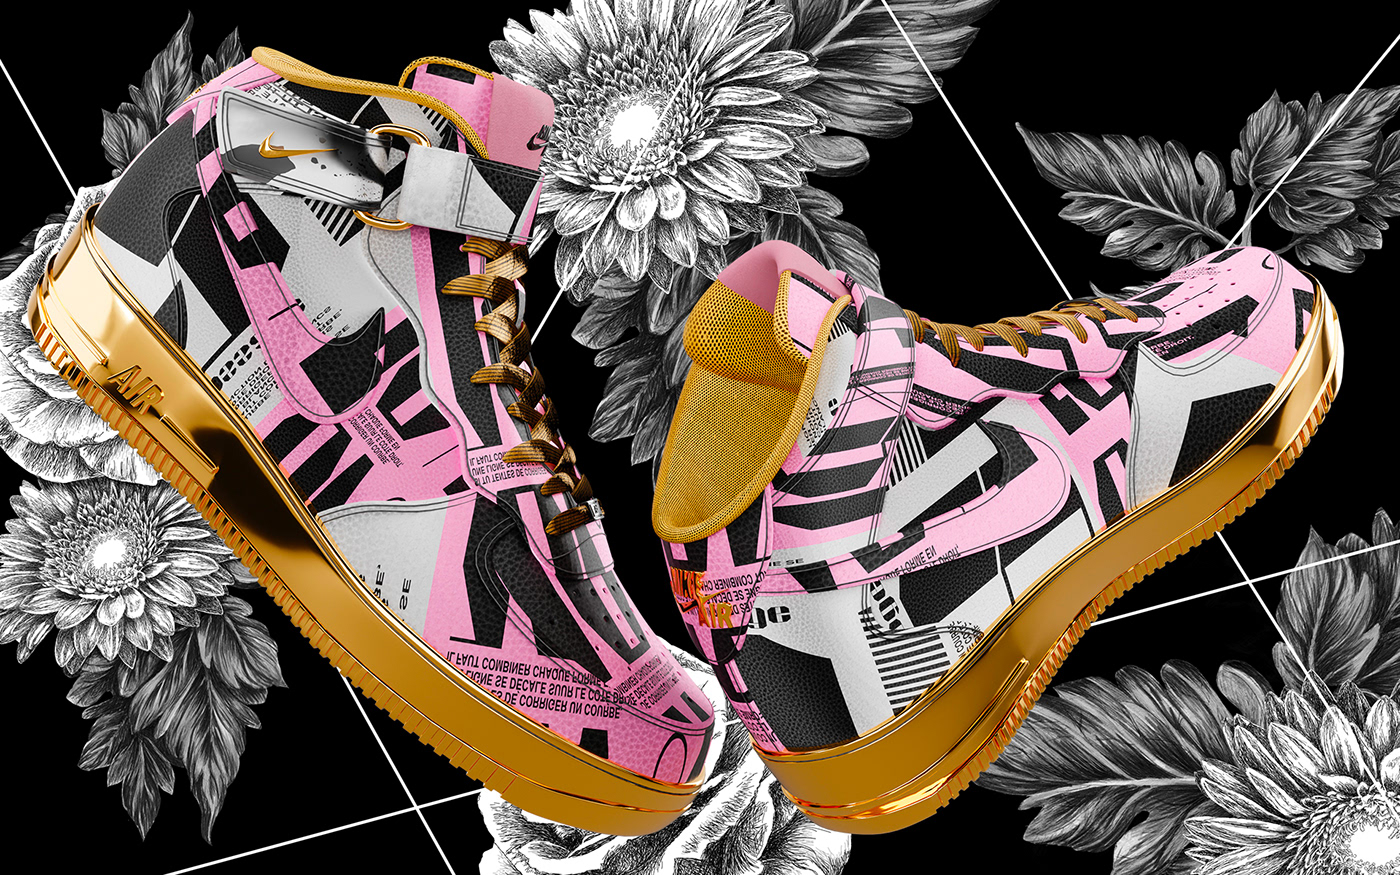 Artwork and patterns for a collection of Nike air sneakers